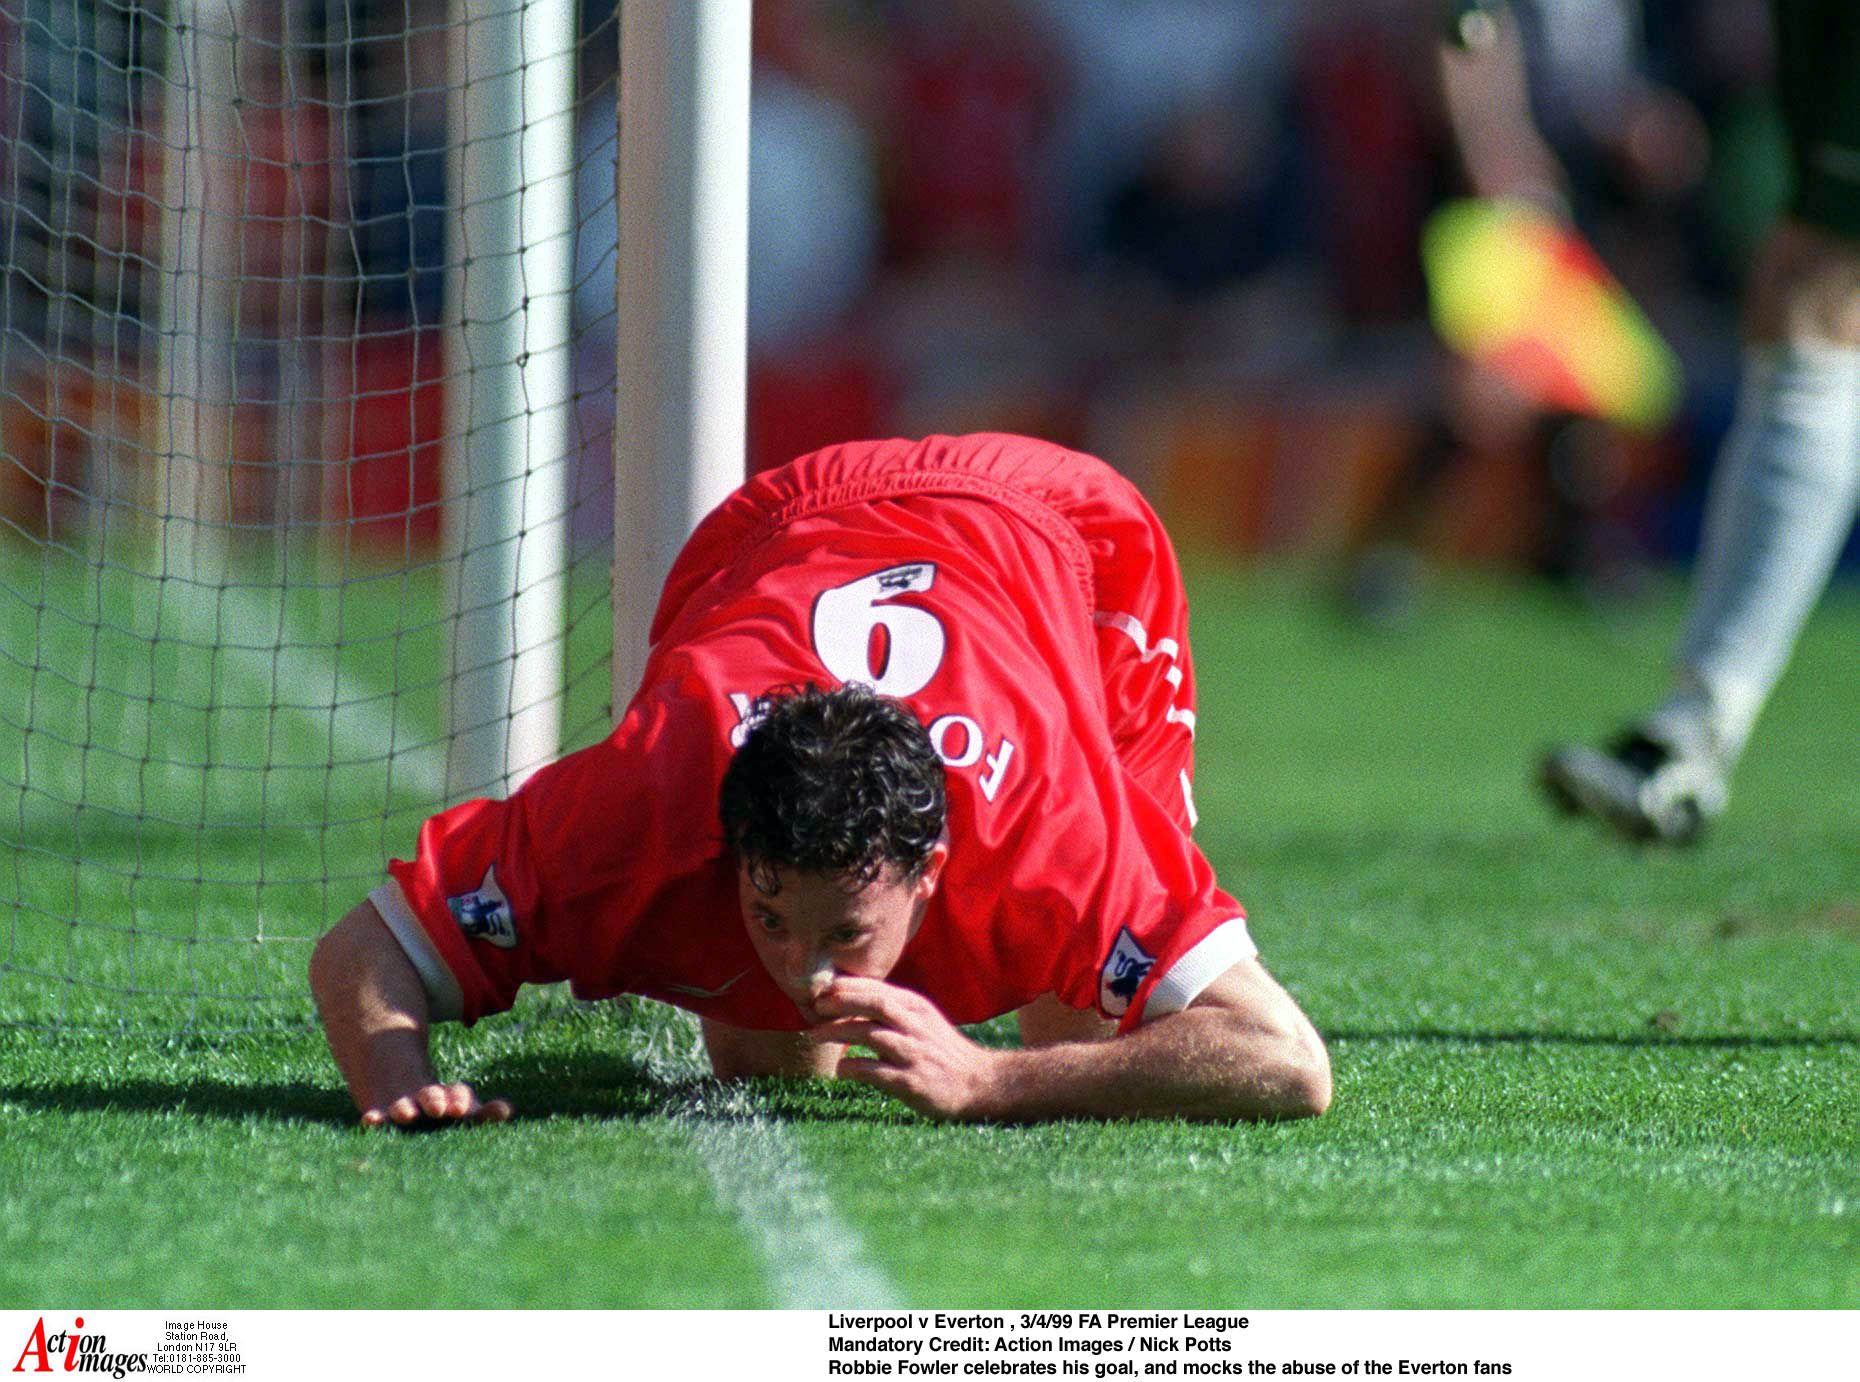 Football - Liverpool v Everton - FA Premier League 98/99 - Anfield 3/4/99 
Robbie Fowler celebrates after scoring a goal for Liverpool goal, and mocks the abuse of the Everton fans infamous alleged 